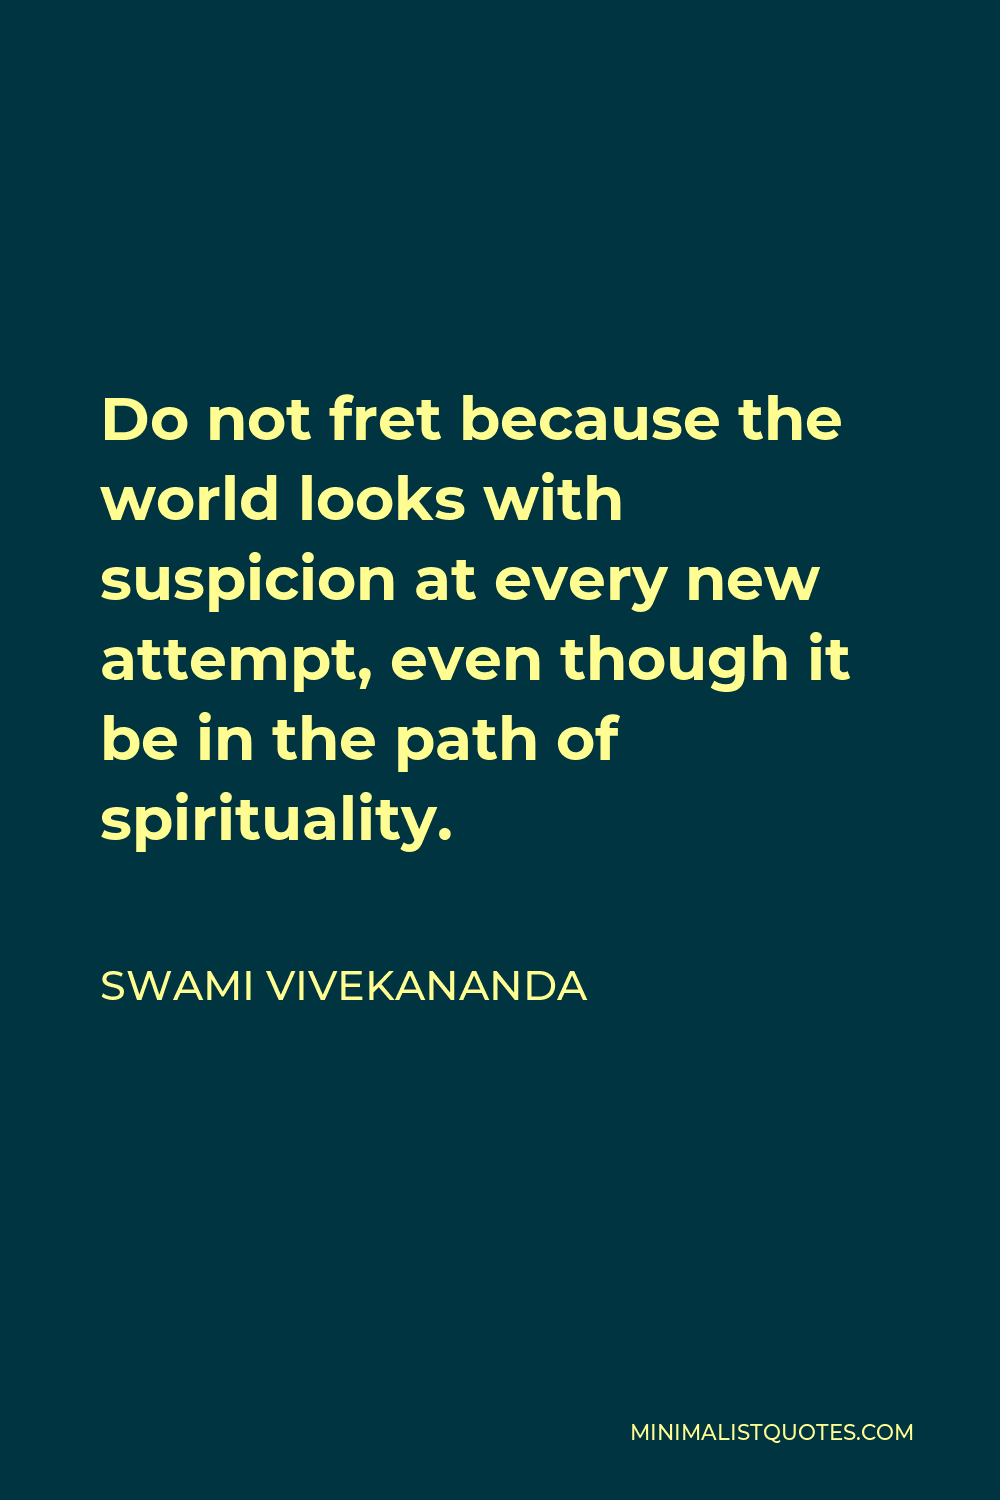 Swami Vivekananda Quote - Do not fret because the world looks with suspicion at every new attempt, even though it be in the path of spirituality.